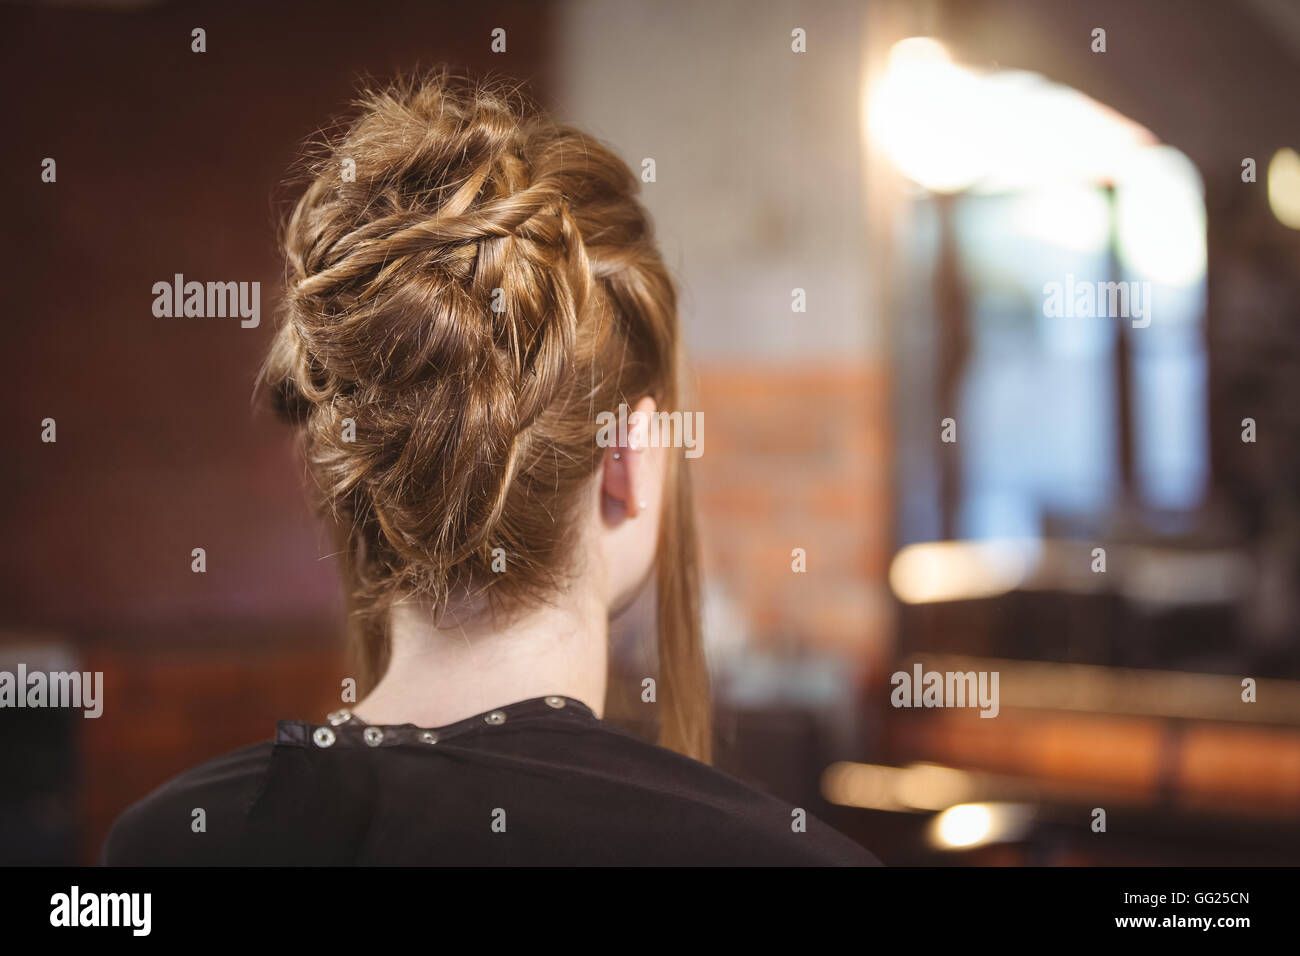 Rear view of woman with updo hairstyle Stock Photo